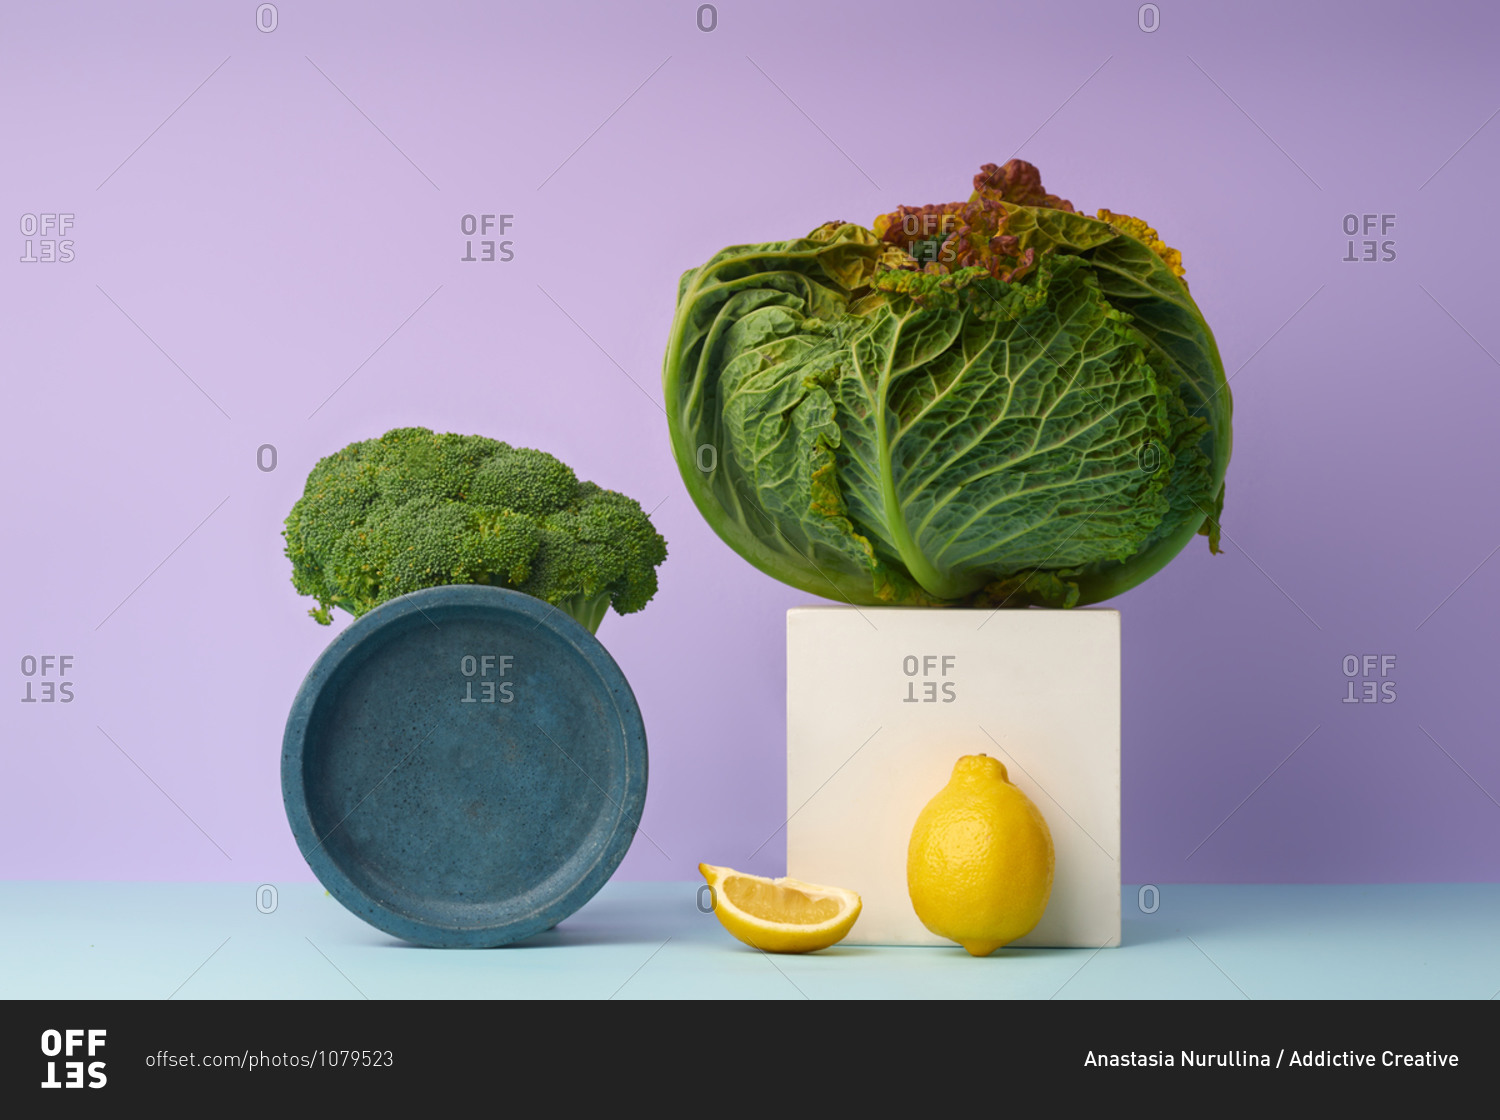 Still life with savoy cabbage, broccoli and lemon